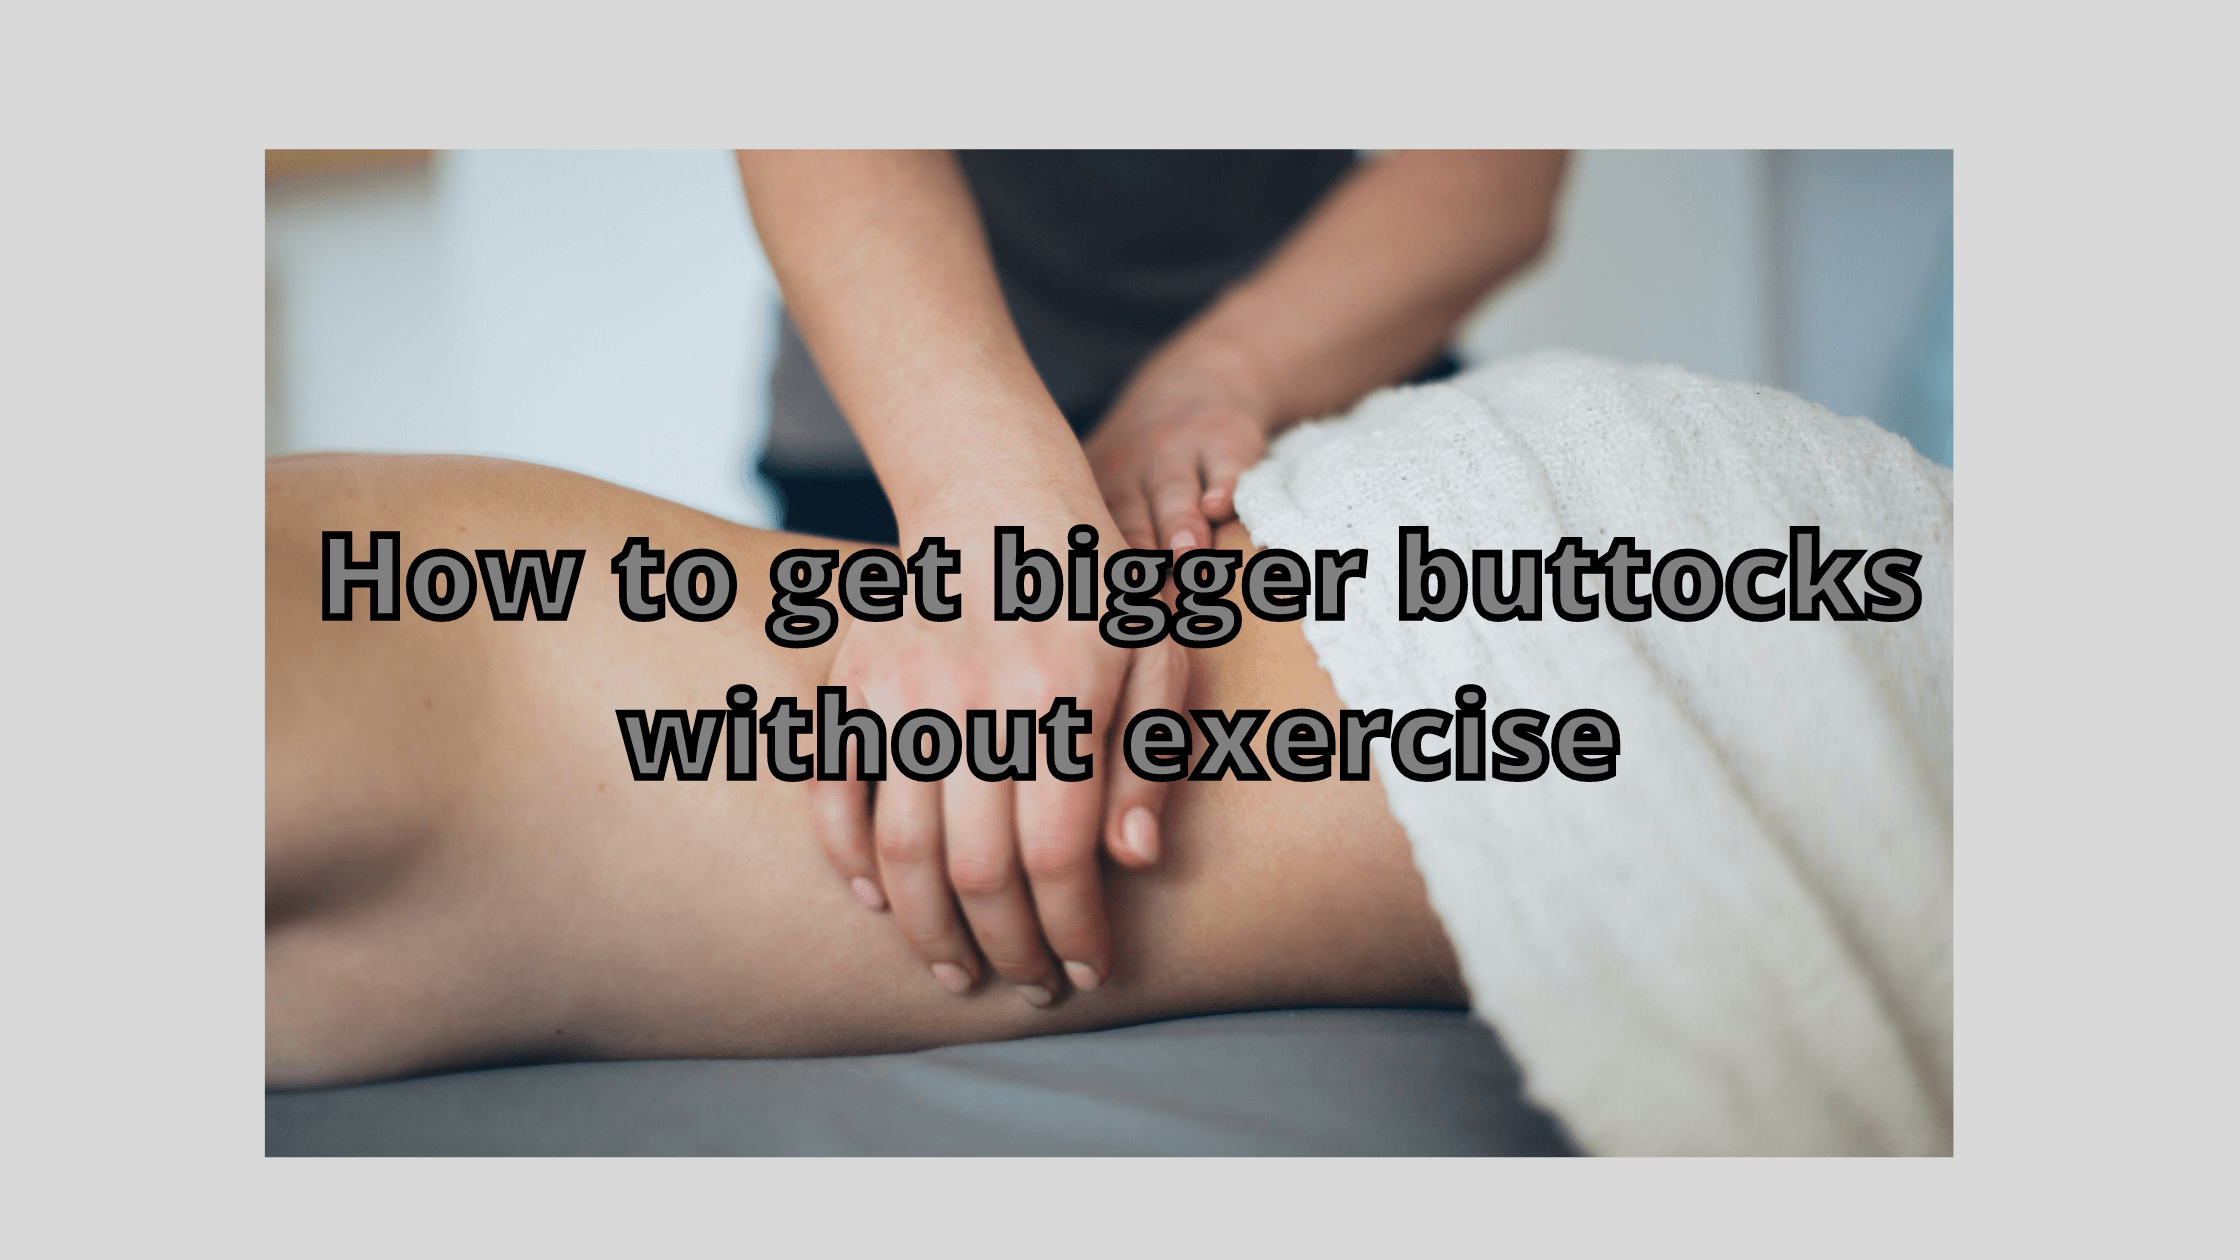 how to get bigger buttocks without exercise